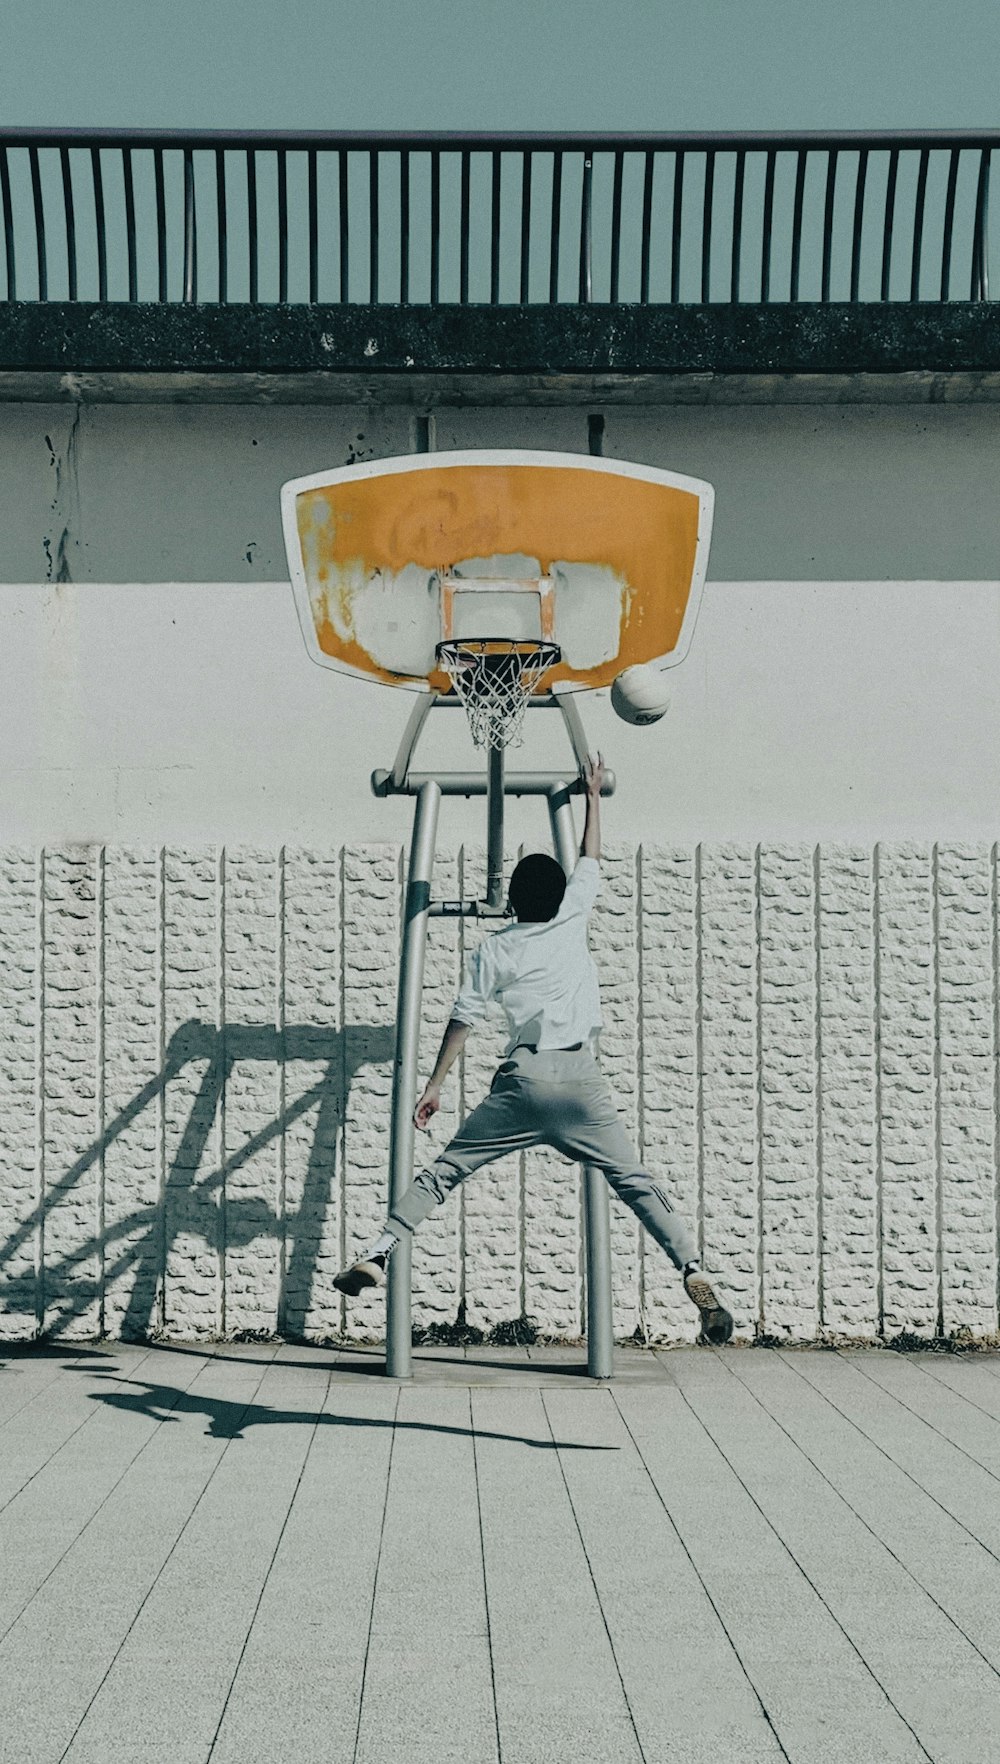 a man is playing basketball on a basketball hoop